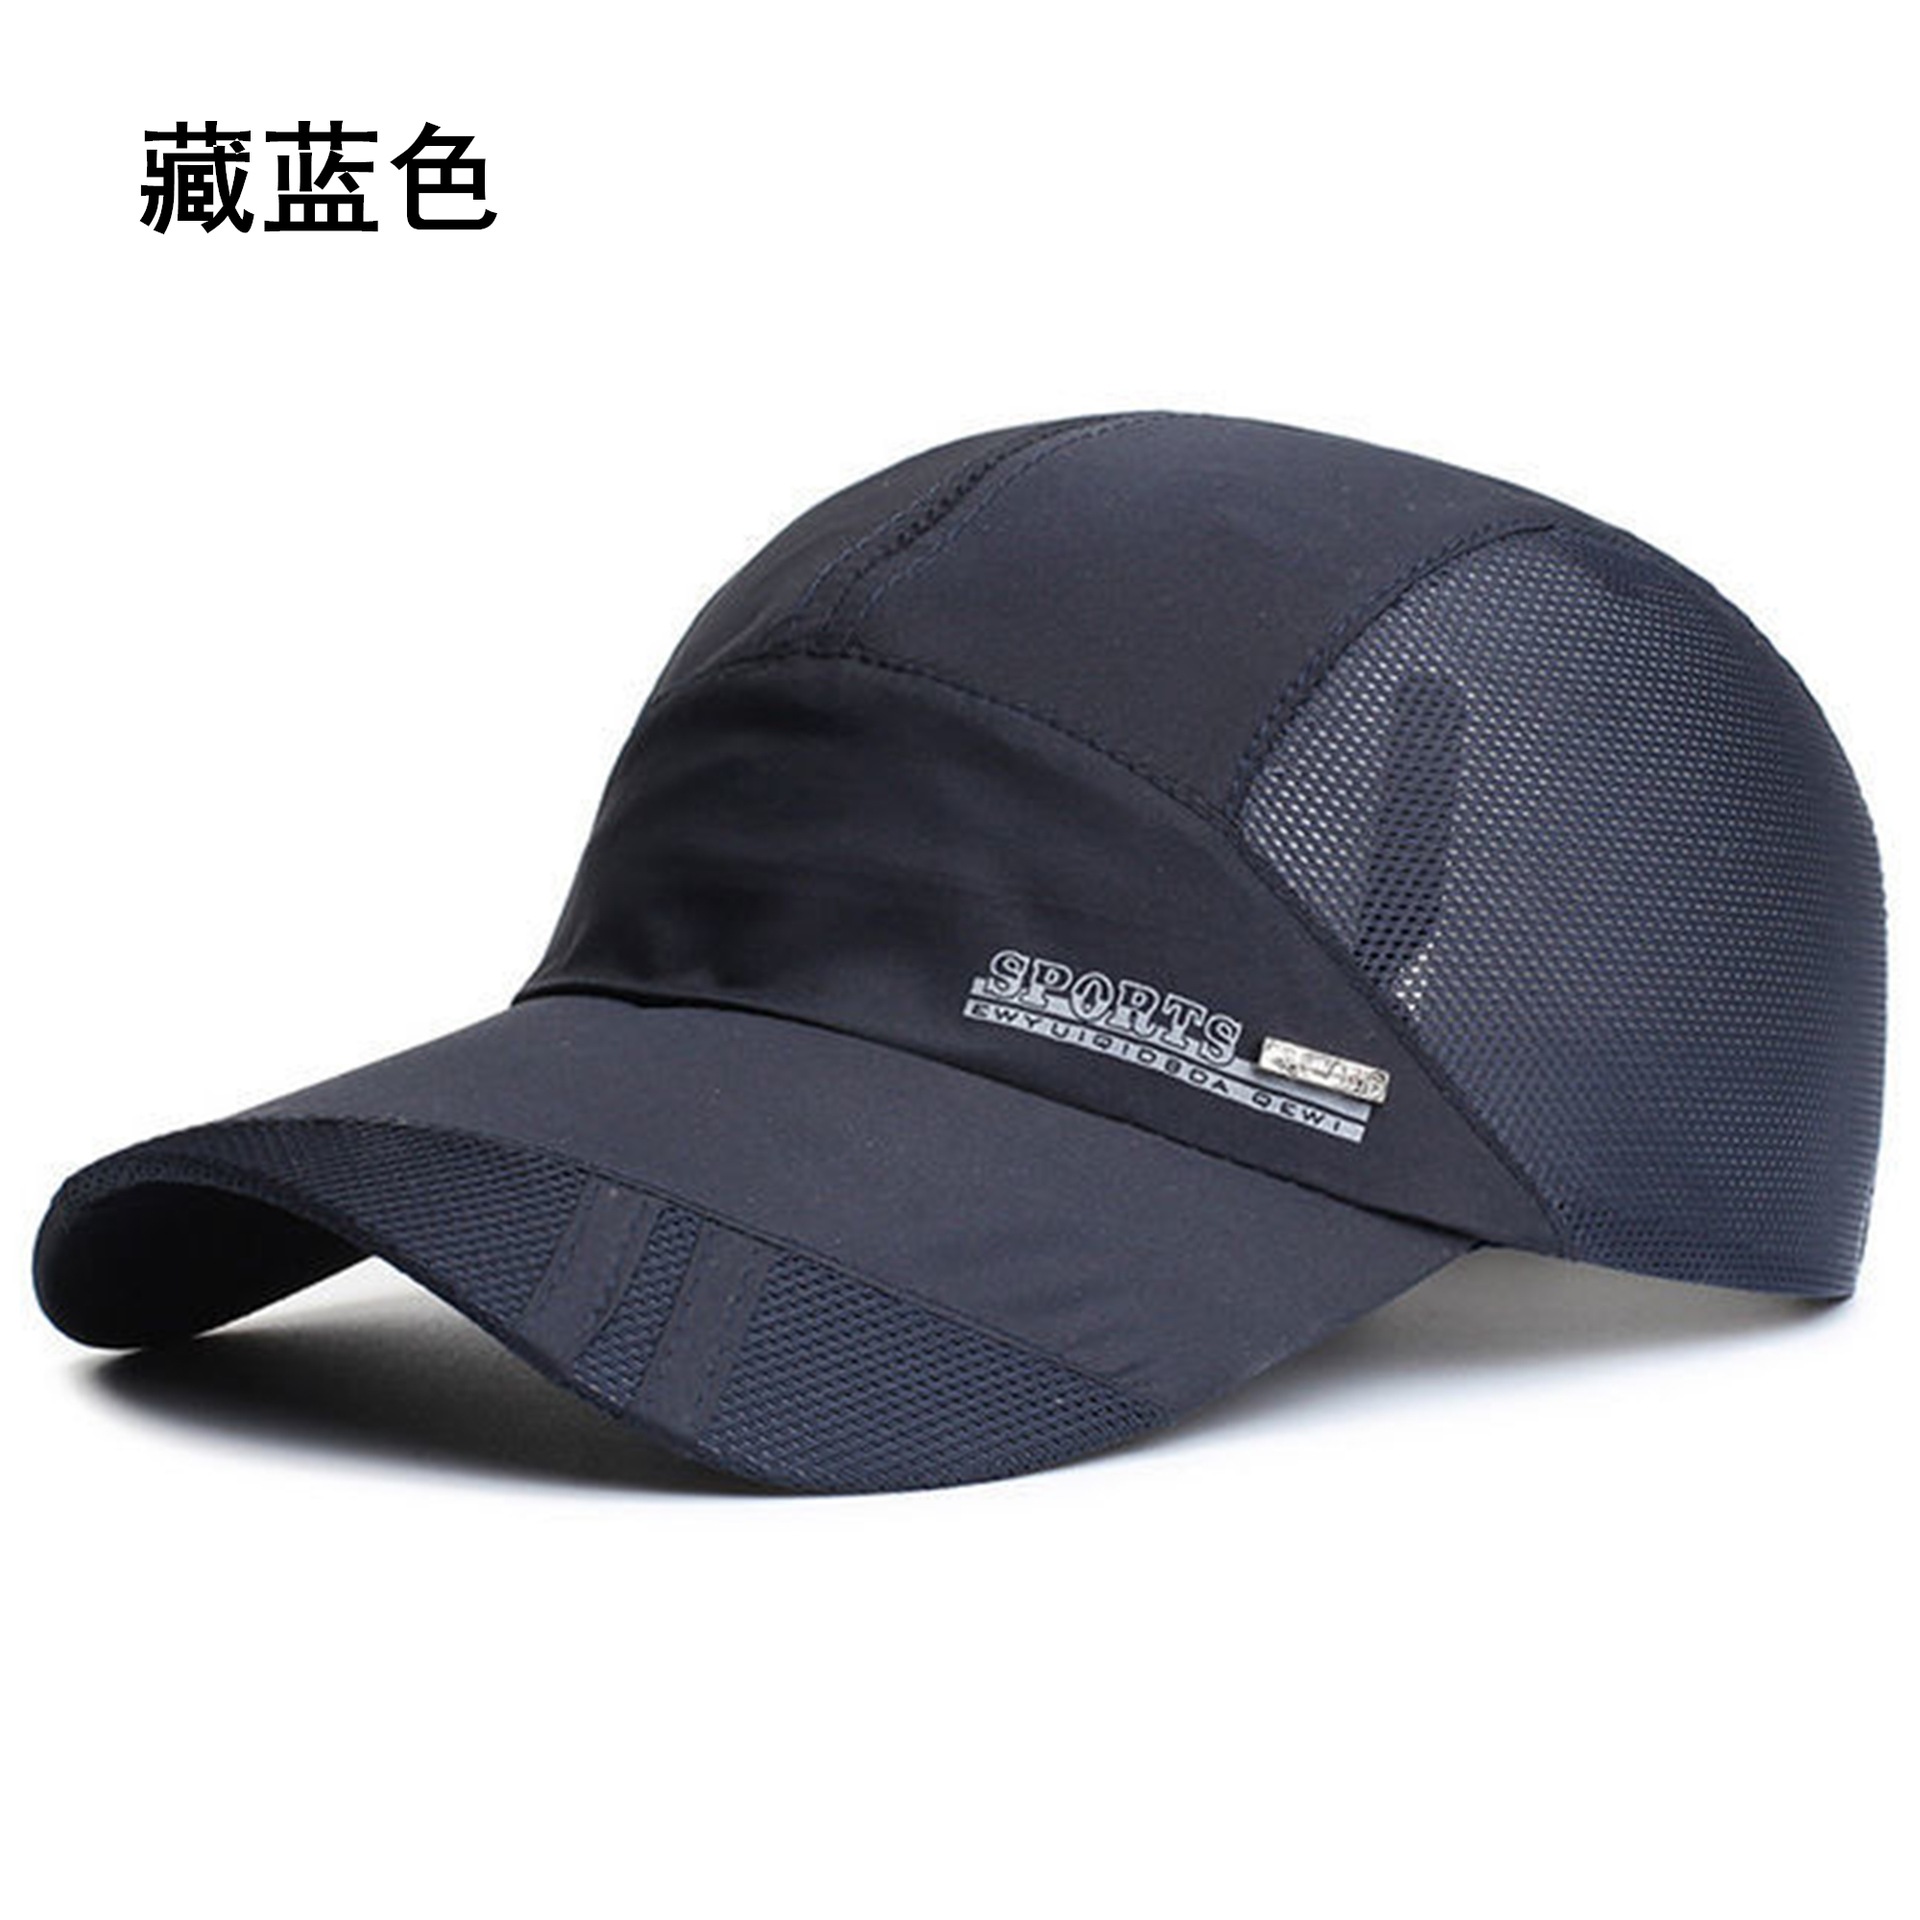 Hat Men's Spring and Summer Lightweight Sun-Poof Peaked Cap Breathable Outdoor Leisure Fishing Sun Protection Baseball Sun Hat